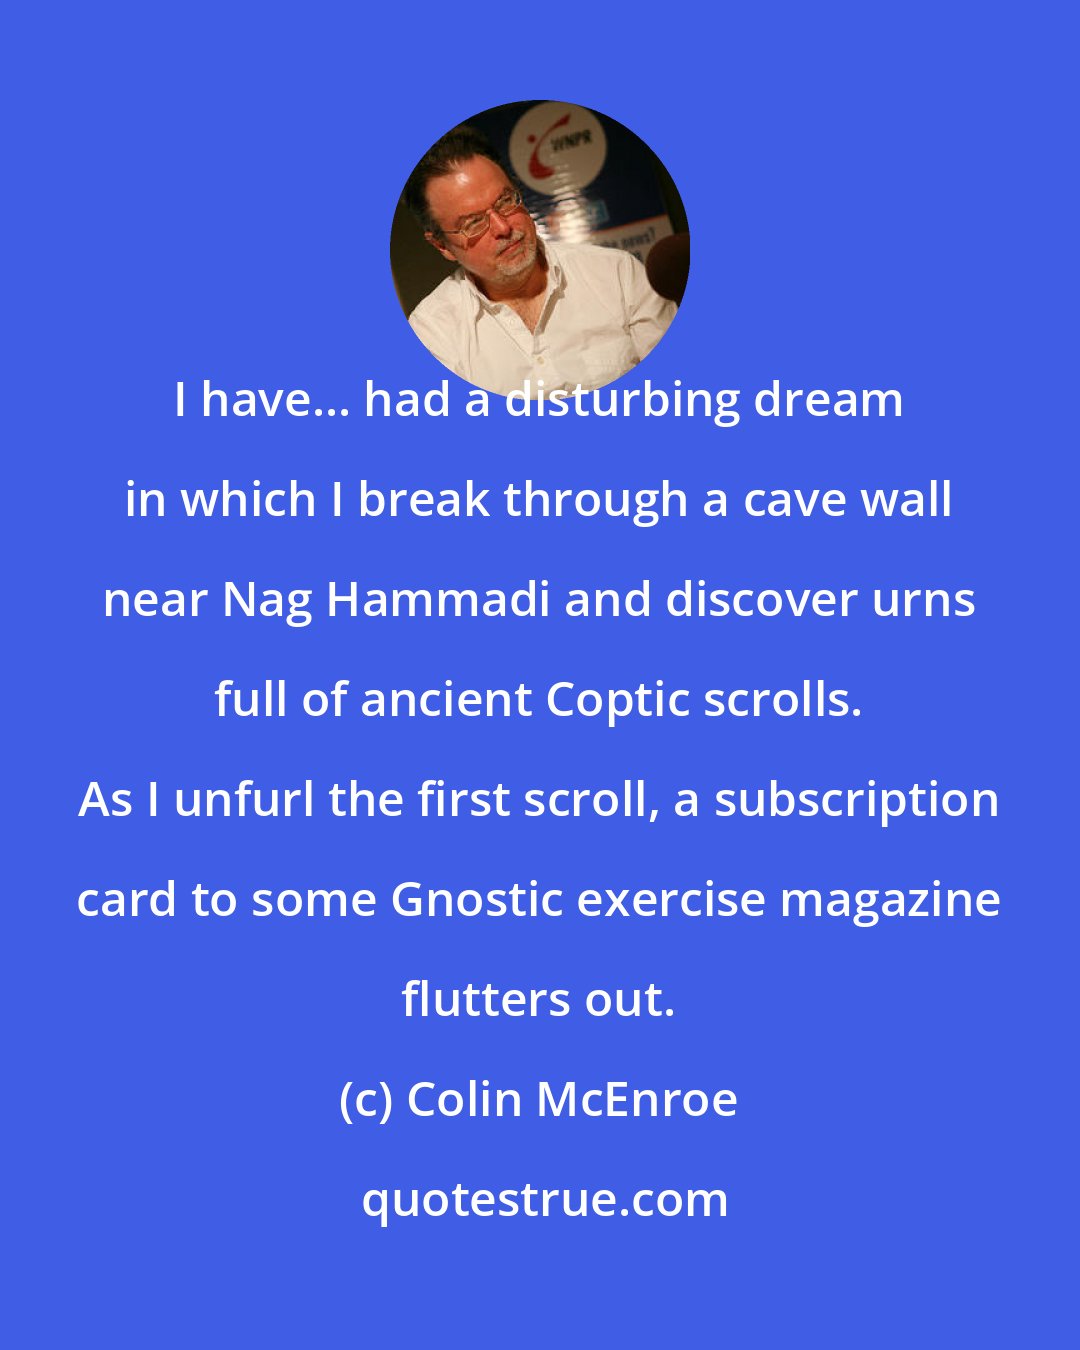 Colin McEnroe: I have... had a disturbing dream in which I break through a cave wall near Nag Hammadi and discover urns full of ancient Coptic scrolls. As I unfurl the first scroll, a subscription card to some Gnostic exercise magazine flutters out.